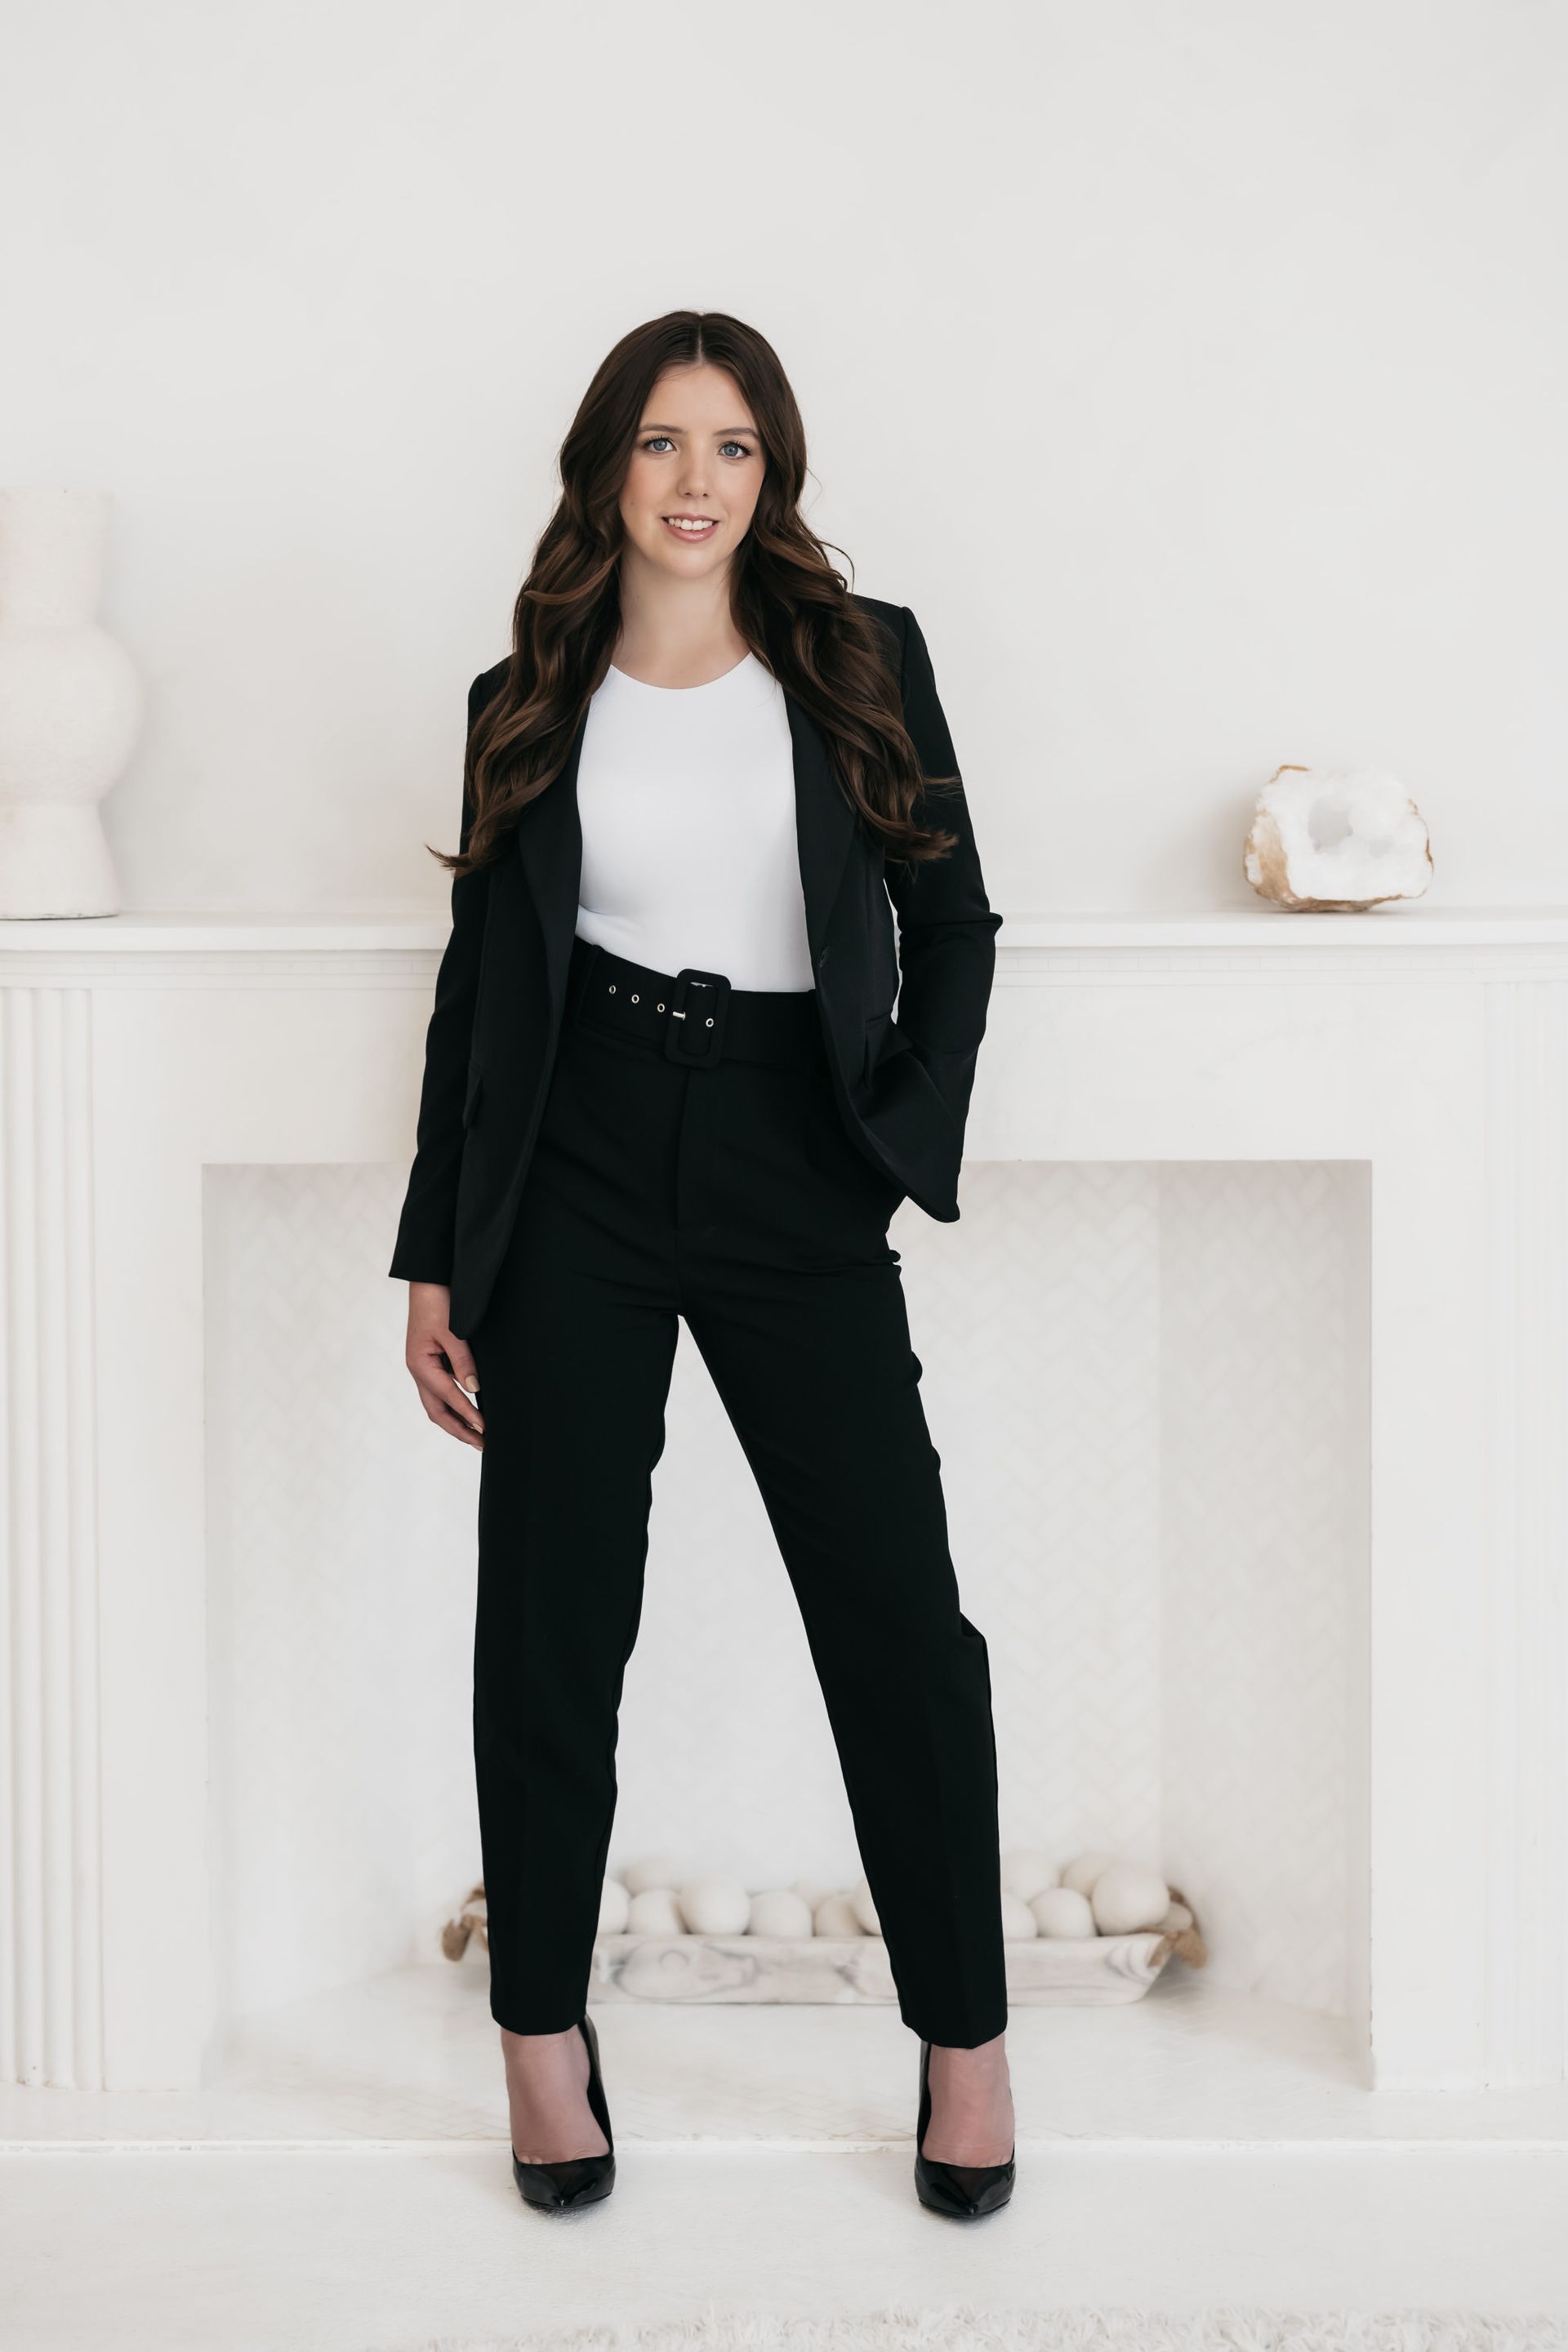 A woman posing for corporate headshots in front of a fireplace, dressed in a sophisticated black blazer and heels.